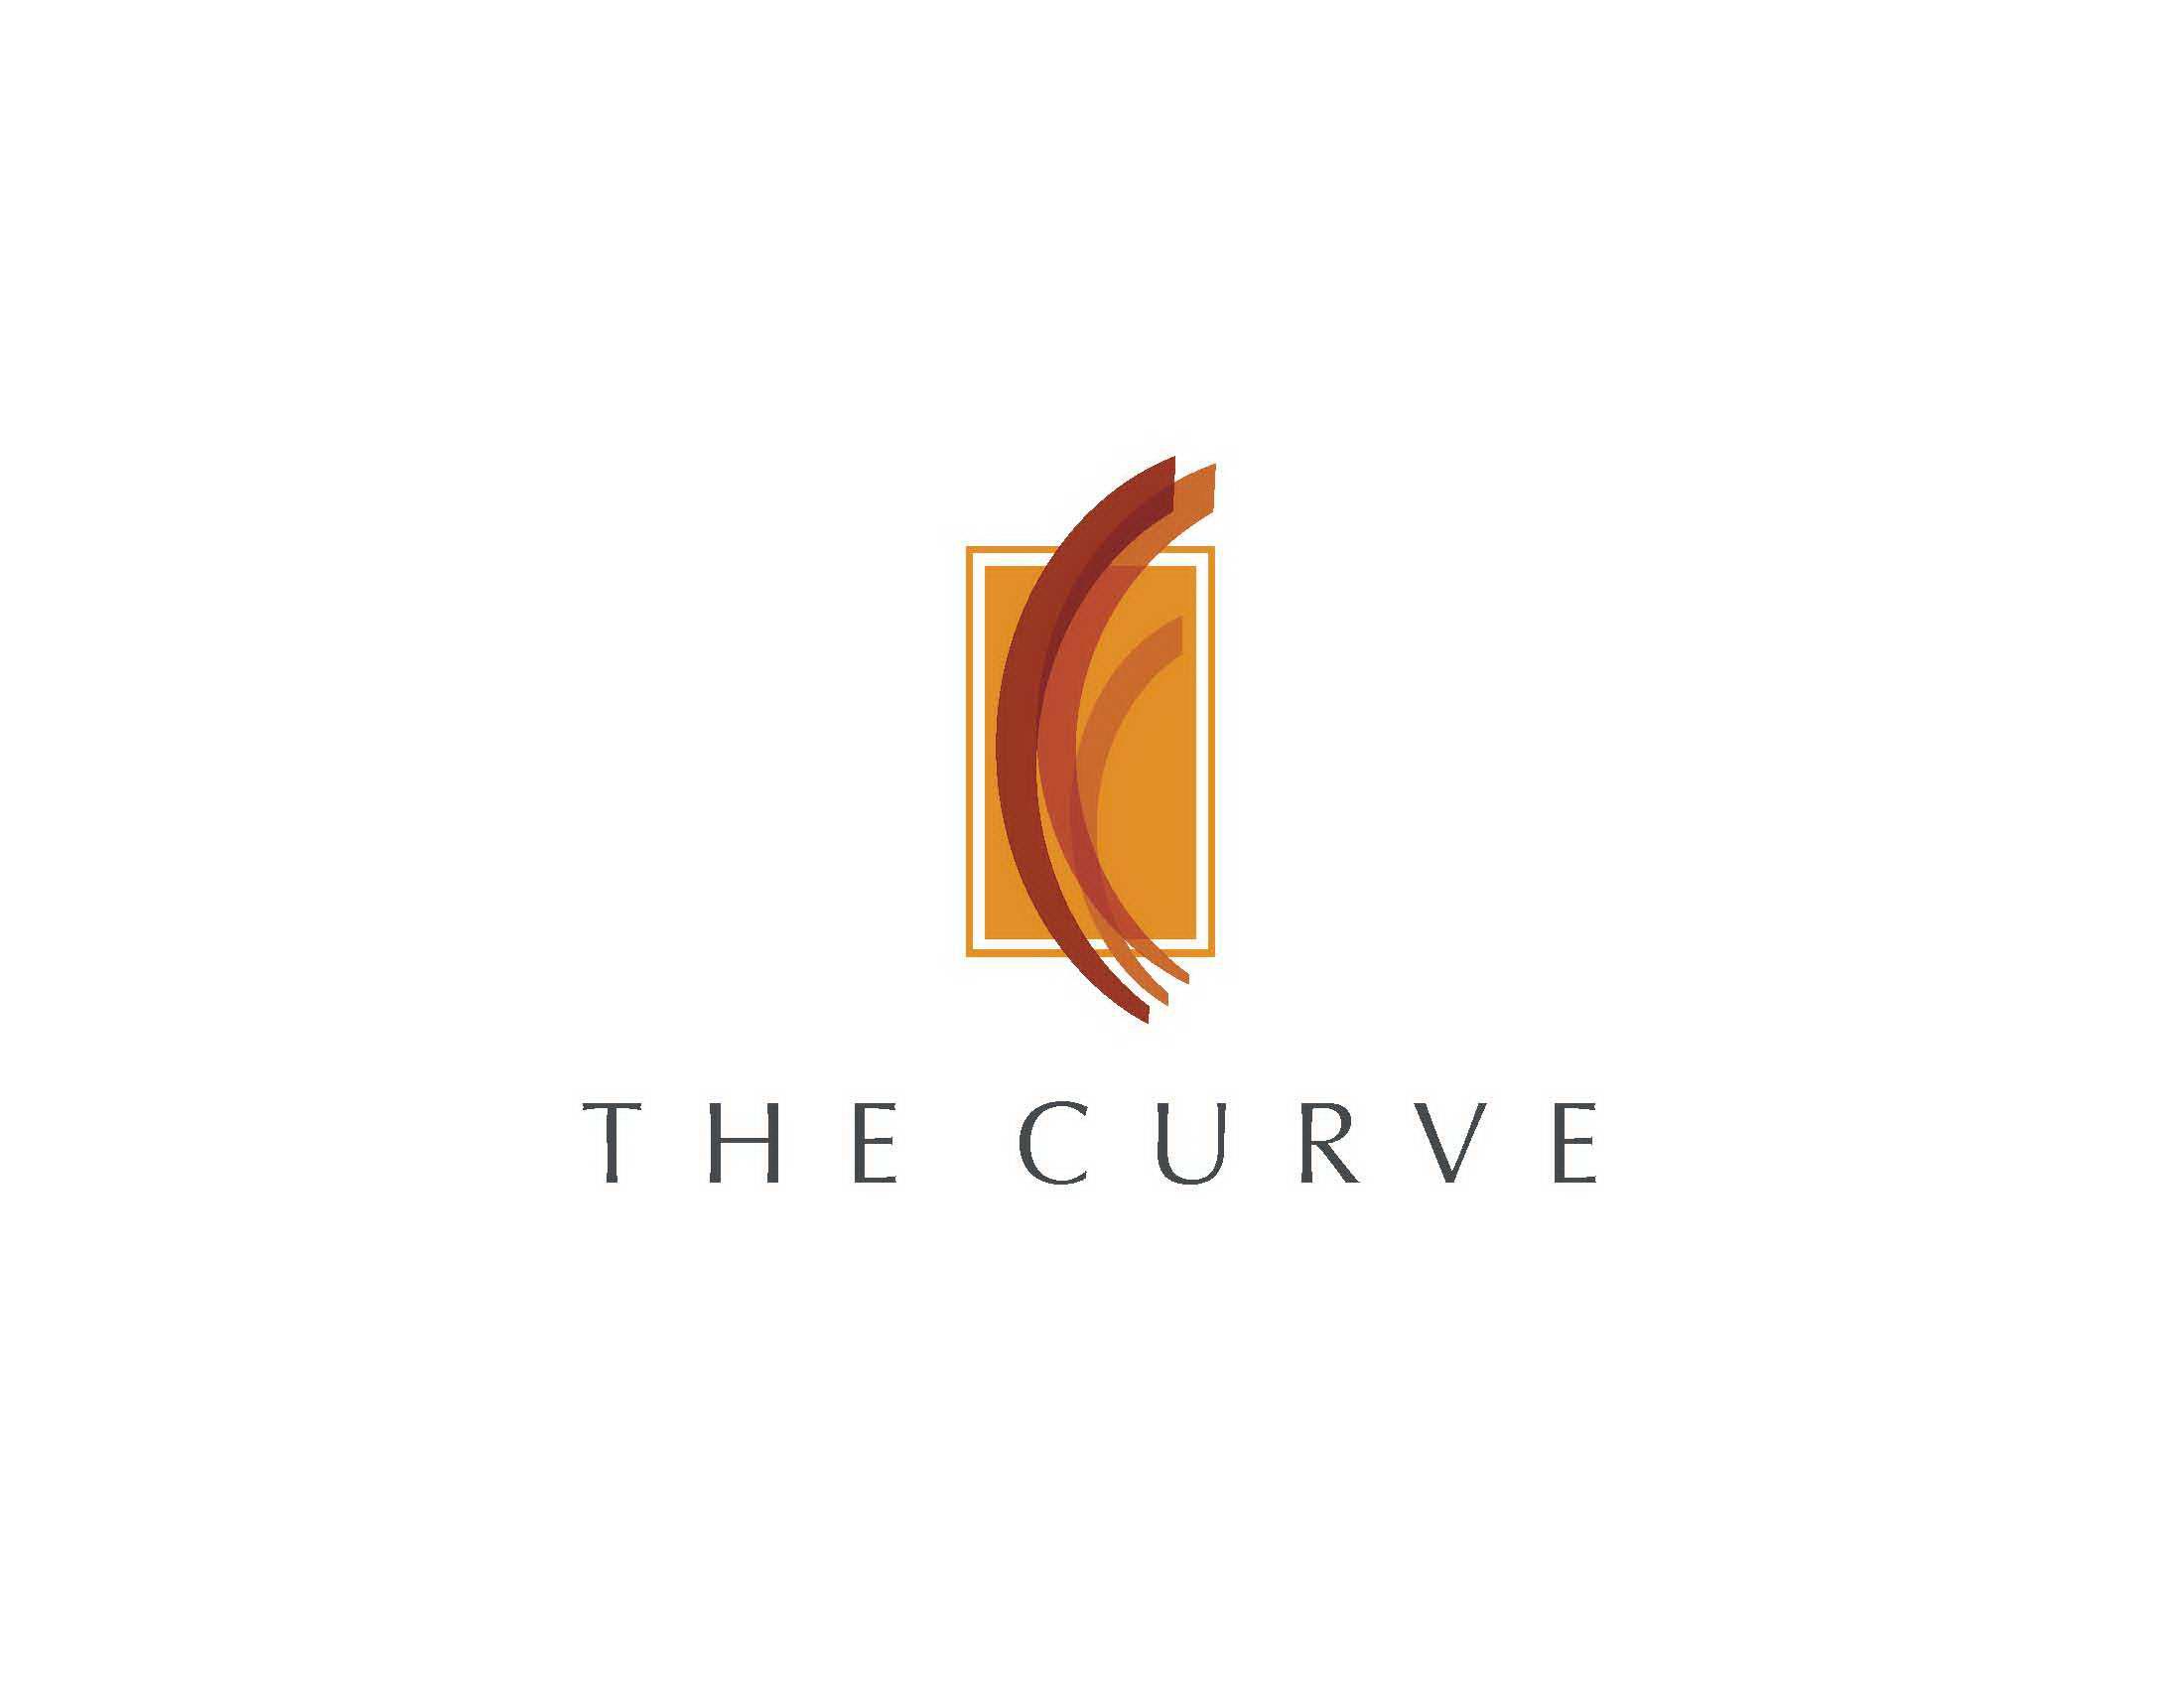 THE CURVE